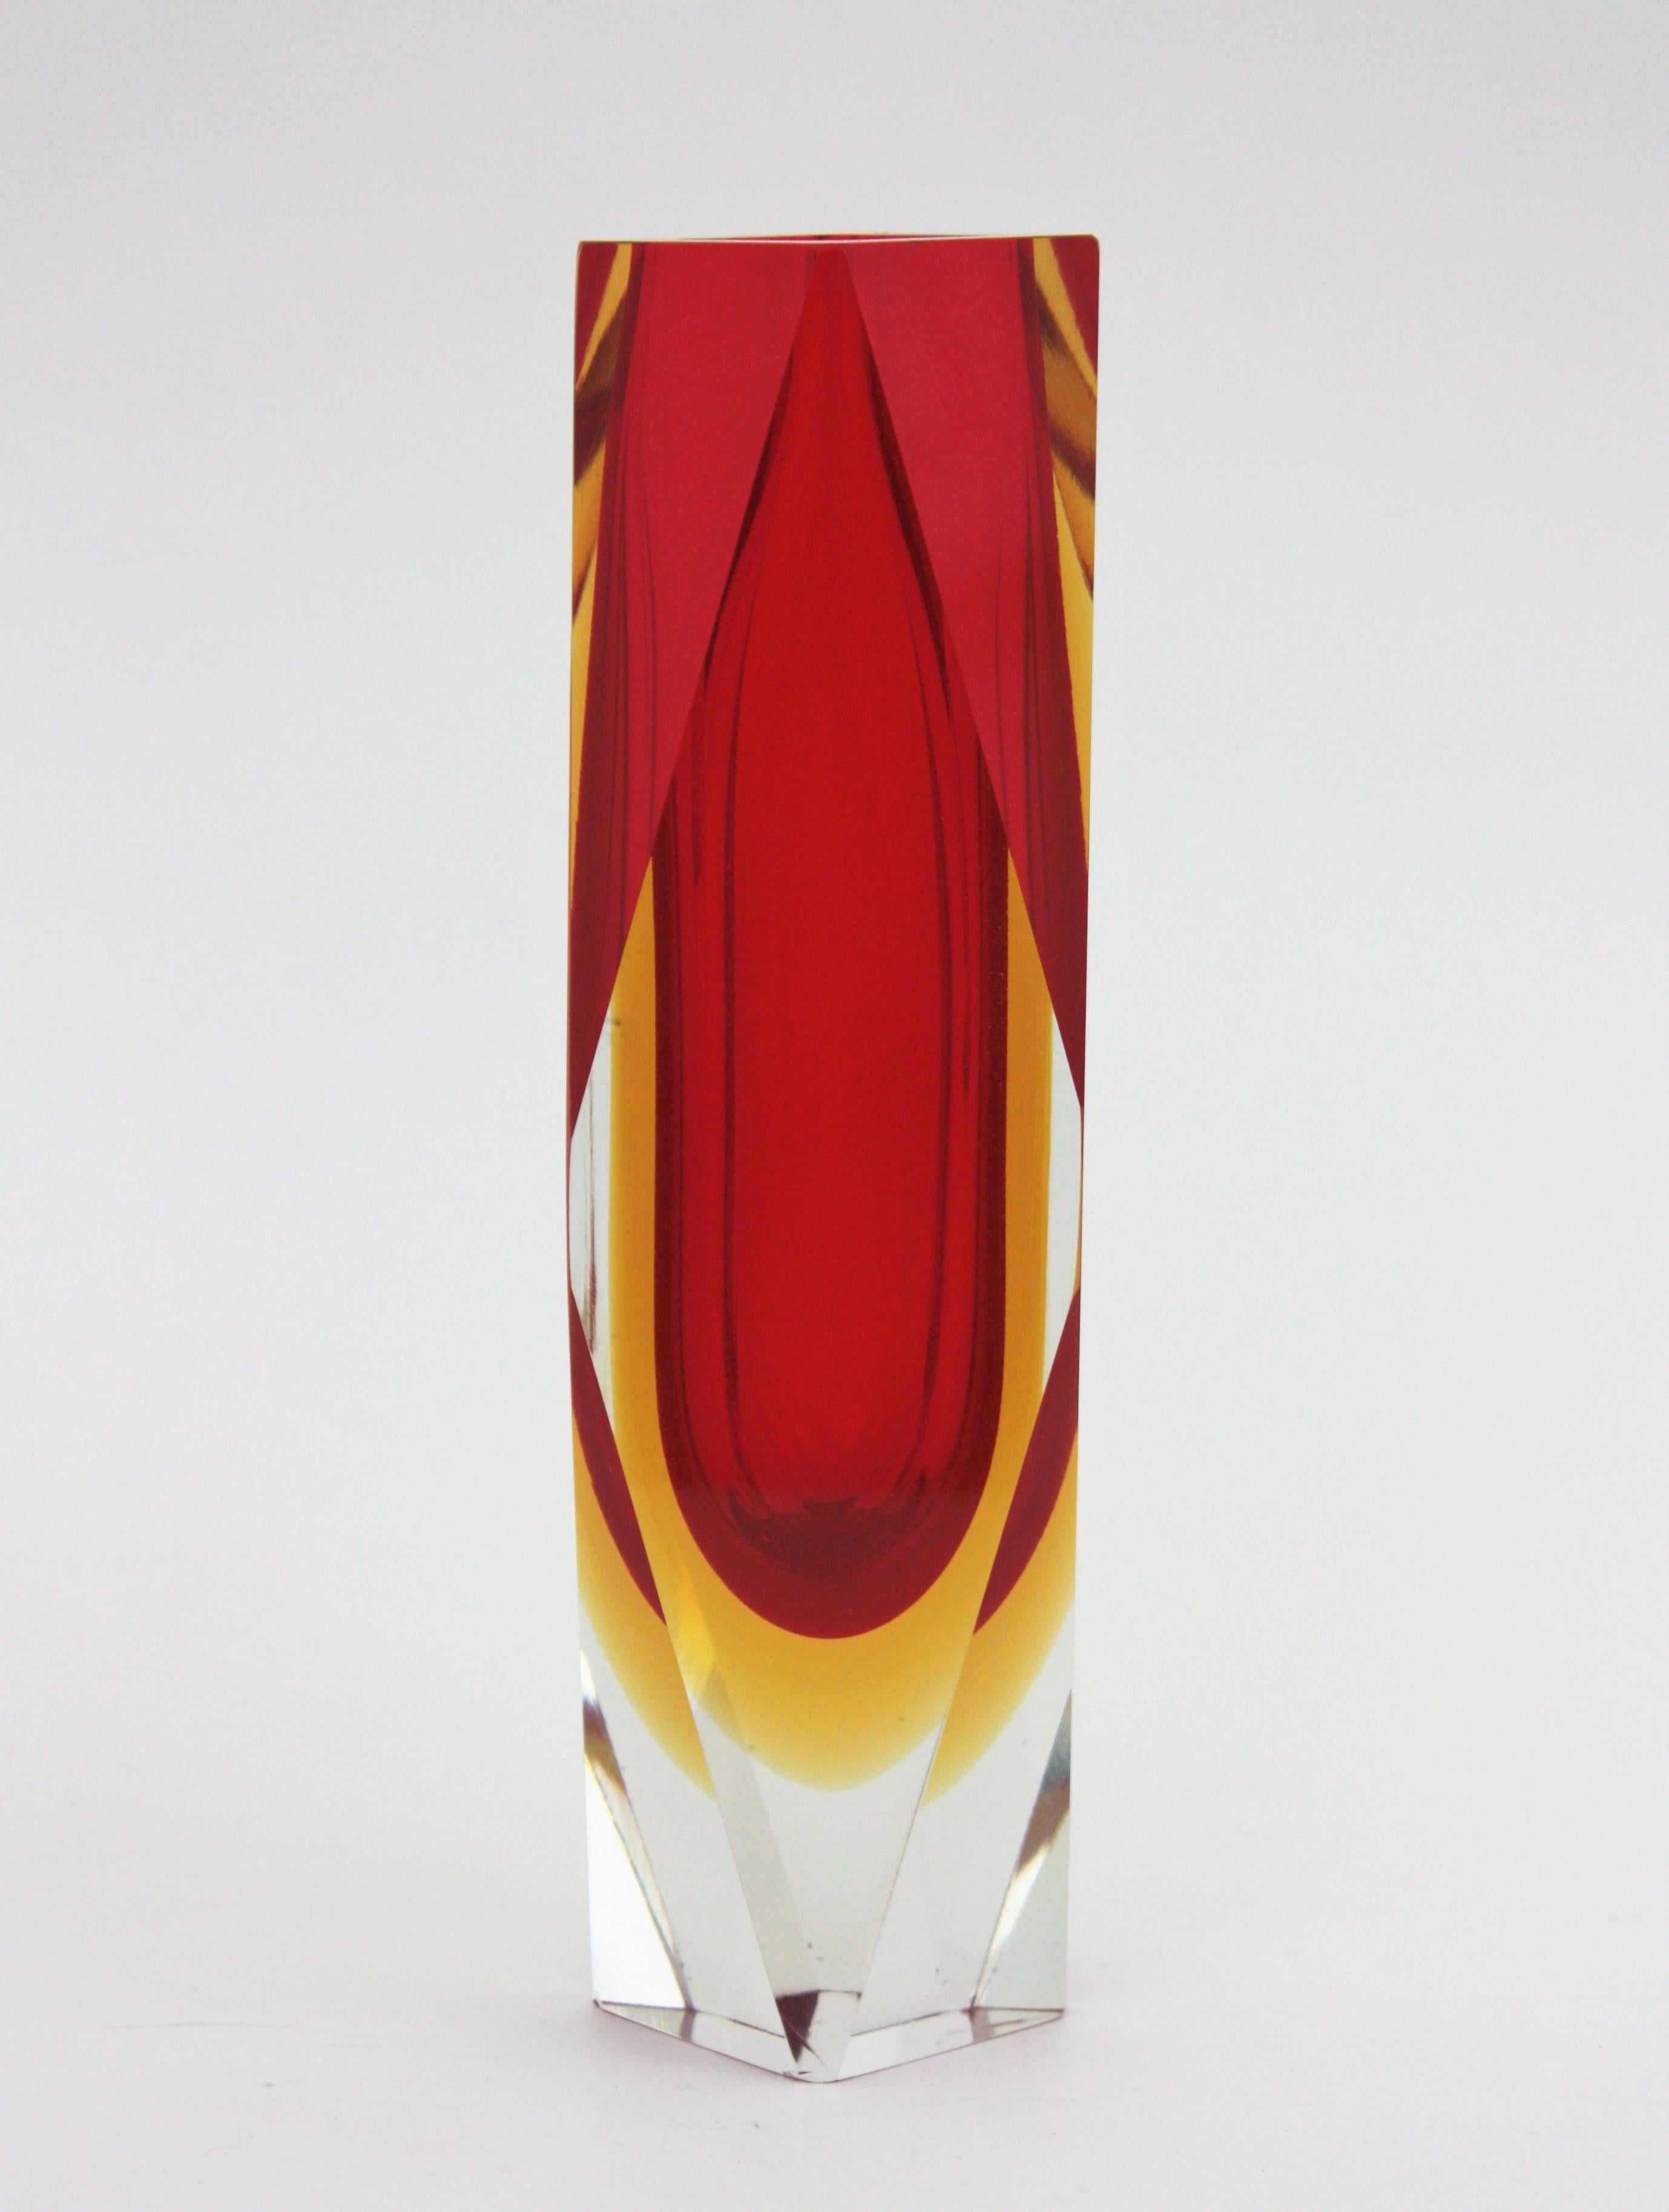 20th Century Huge Mandruzzato Murano Faceted Sommerso Red and Yellow Art Glass Vase